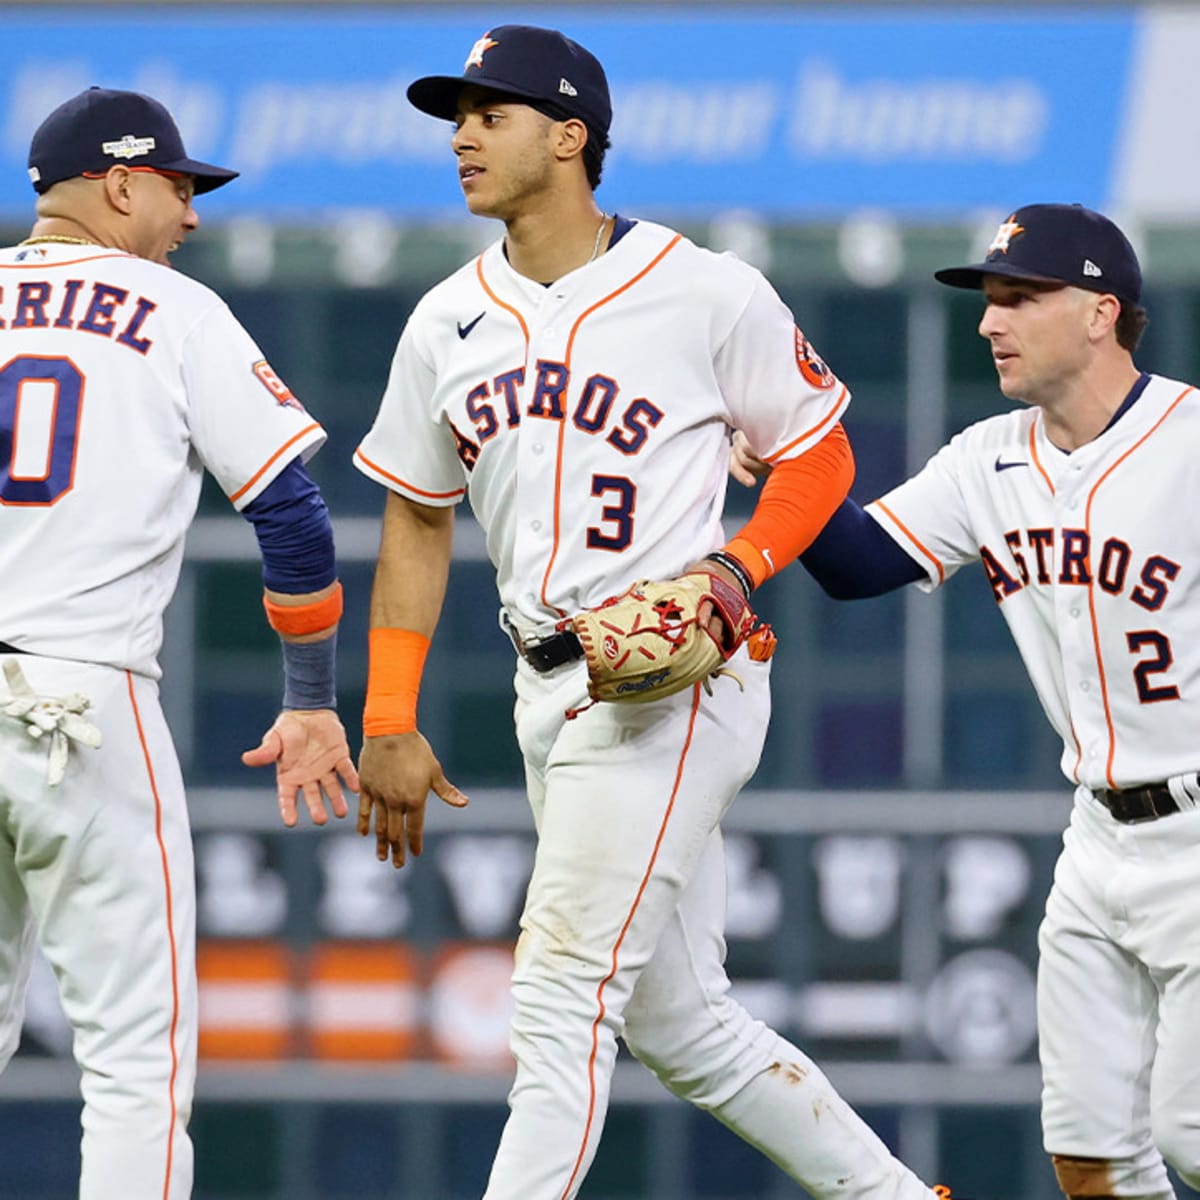 Yankees-Astros American League Championship Series Game 2 odds